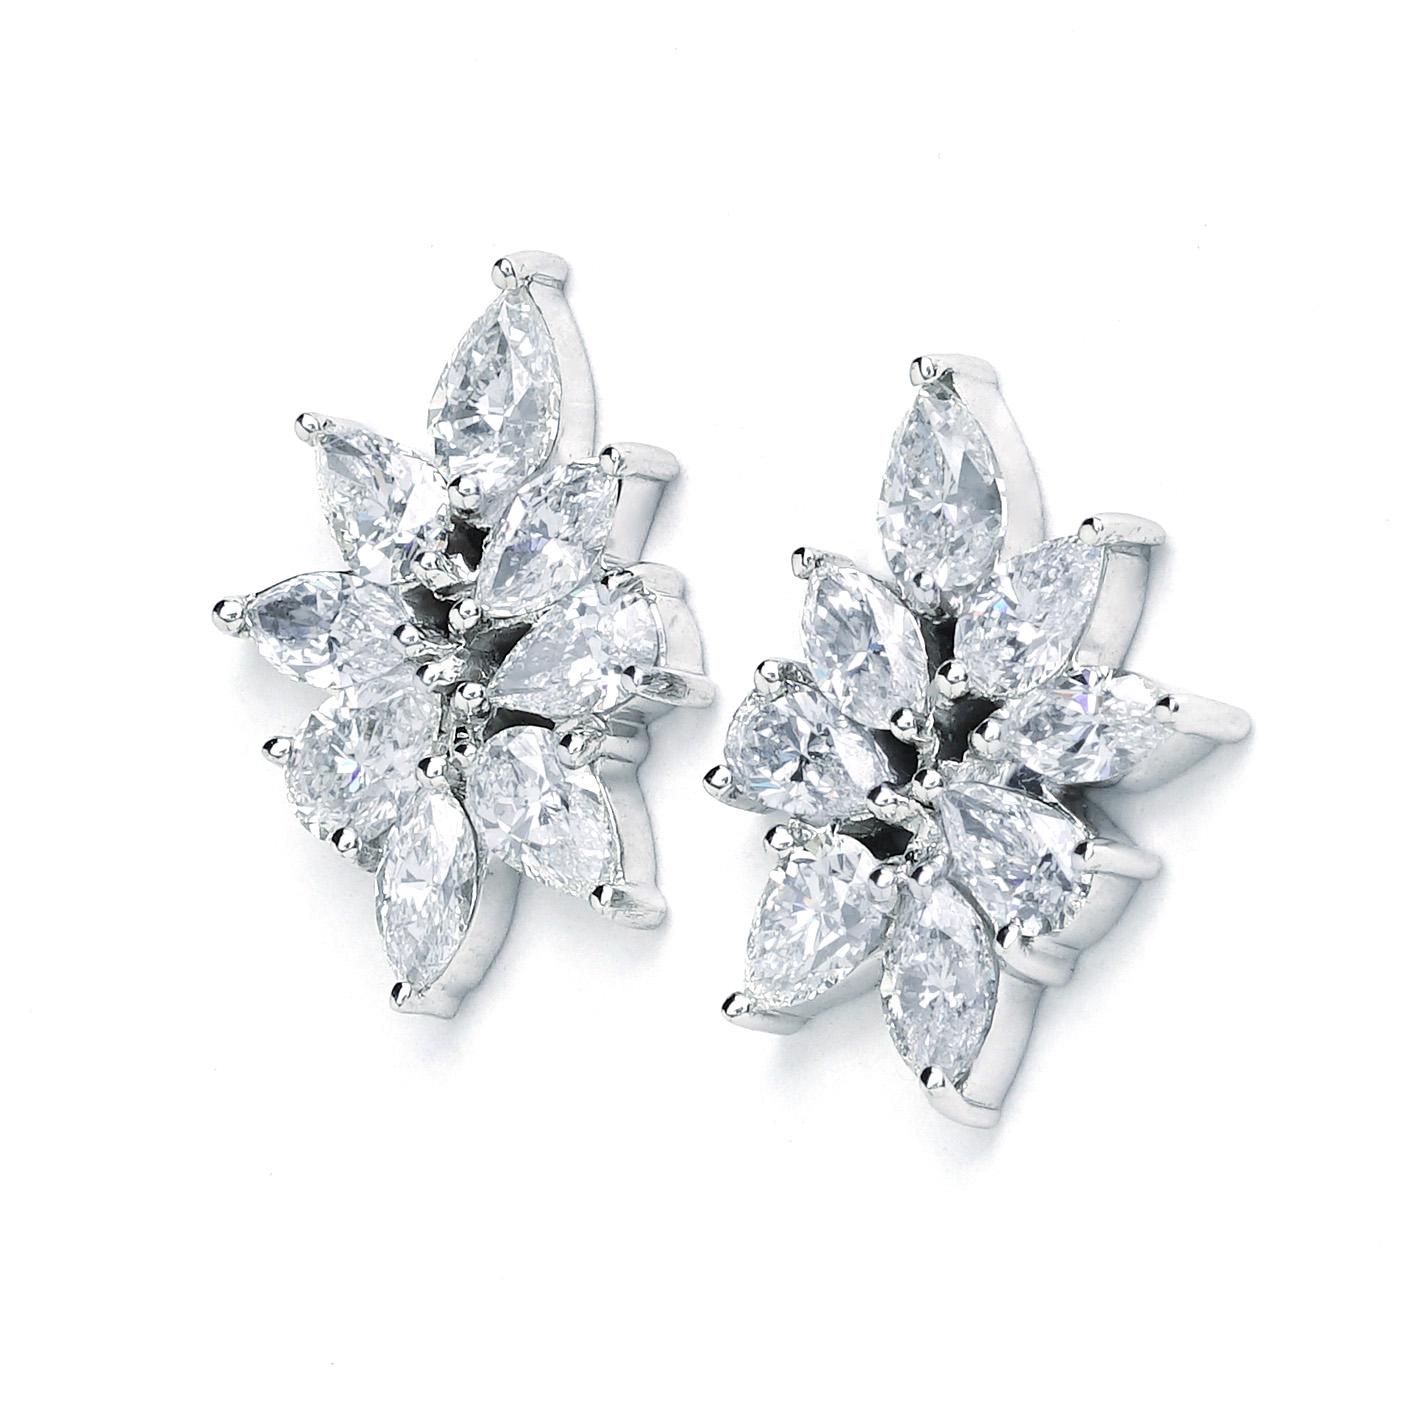 These New York Jewelers earrings are made of 14K white gold. It contains pear G-H color, SI clarity diamonds weighing 5.39 CTTW, marquise G-H color and SI clarity diamonds weighing 2.40 CTTW.